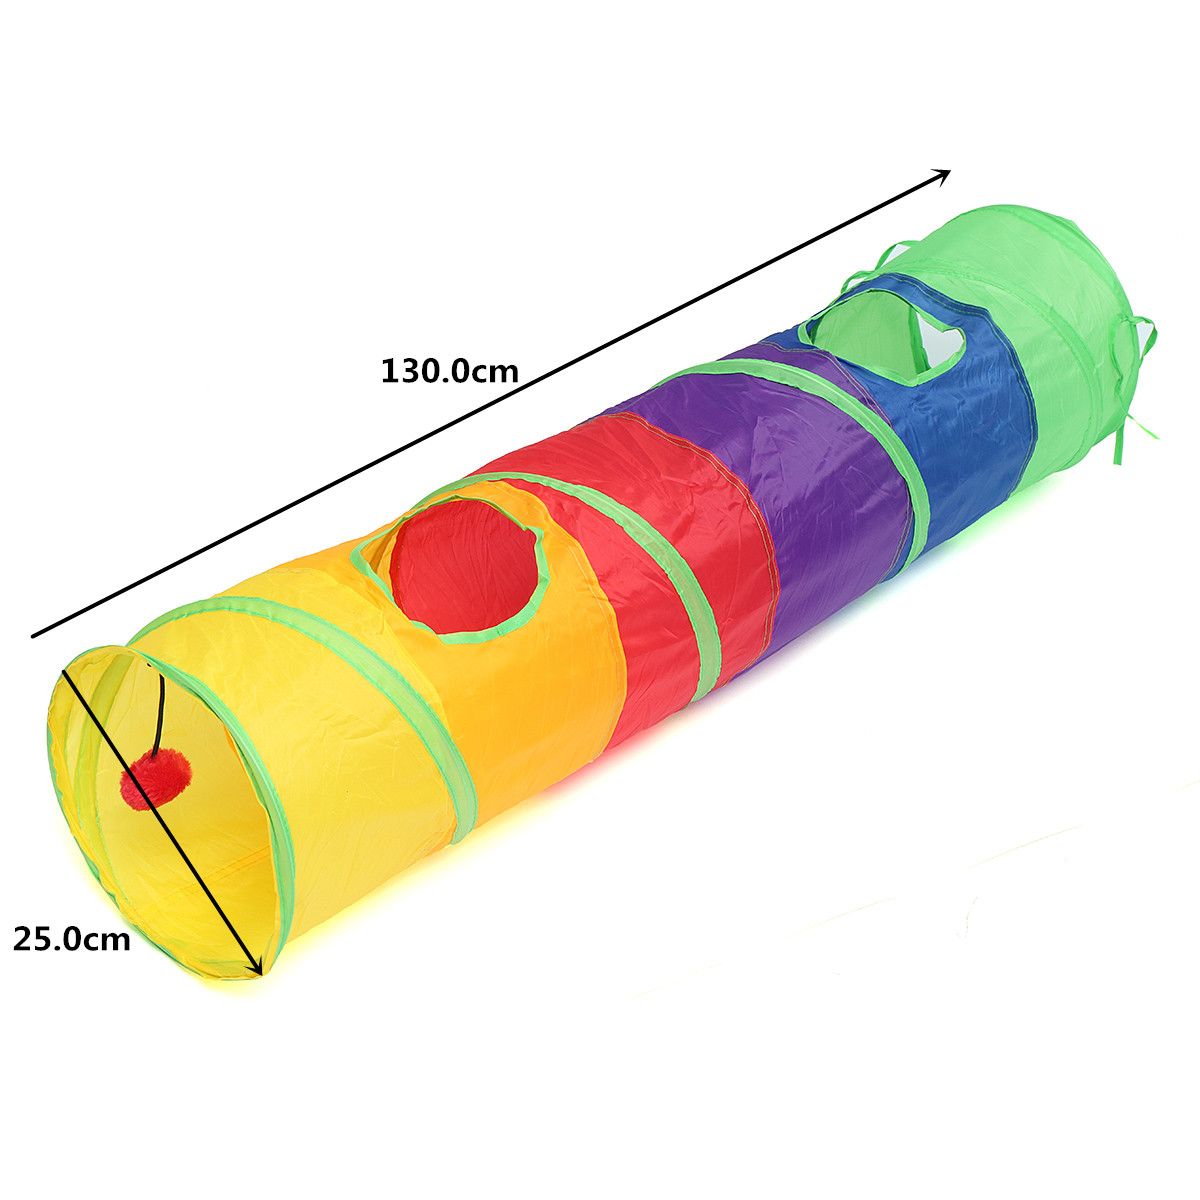 Pet-Tunnel-Cat-Printed-Green-Crinkly-Tunnel-Toy-With-Ball-Play-Fun-Toys-1322549